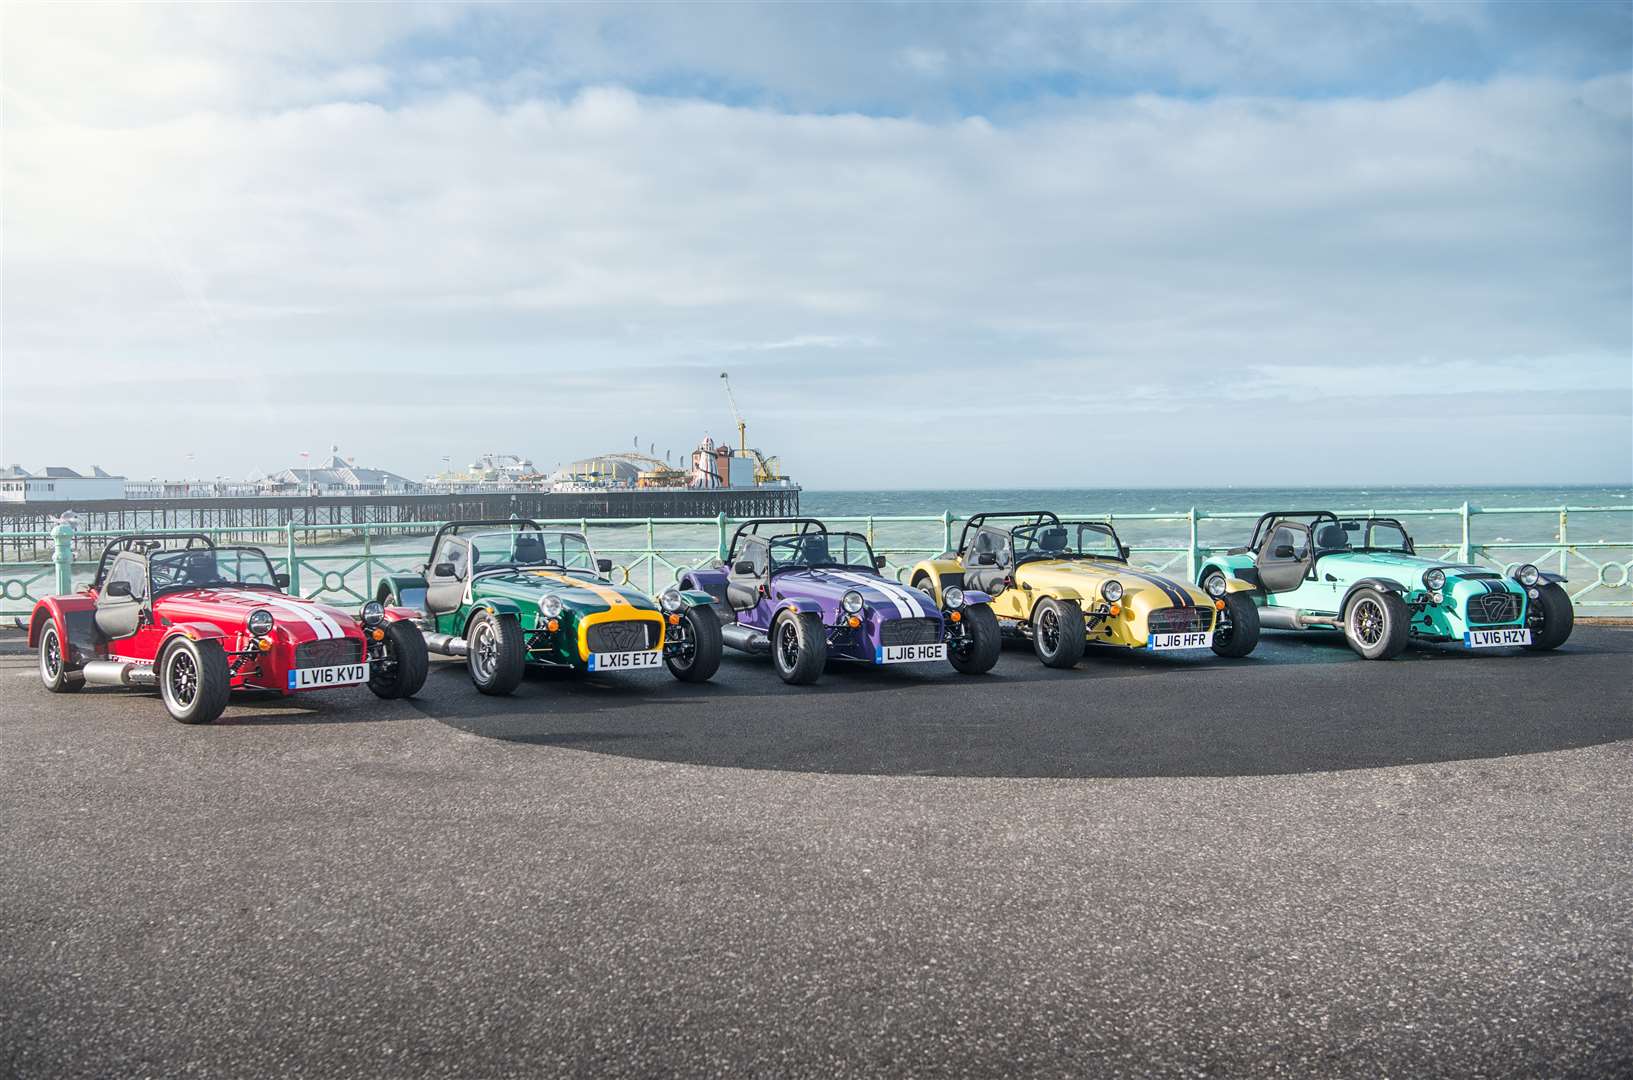 The Caterham Seven range goes from the Seven 160 powered by a 600cc turbocharged three-cylinder engine to the 620R, which uses a supercharged 2.0-litre Ford engine and can hit 60mph in 2.79 seconds – around the same as the famous, and far more expensive, Bugatti Veyron